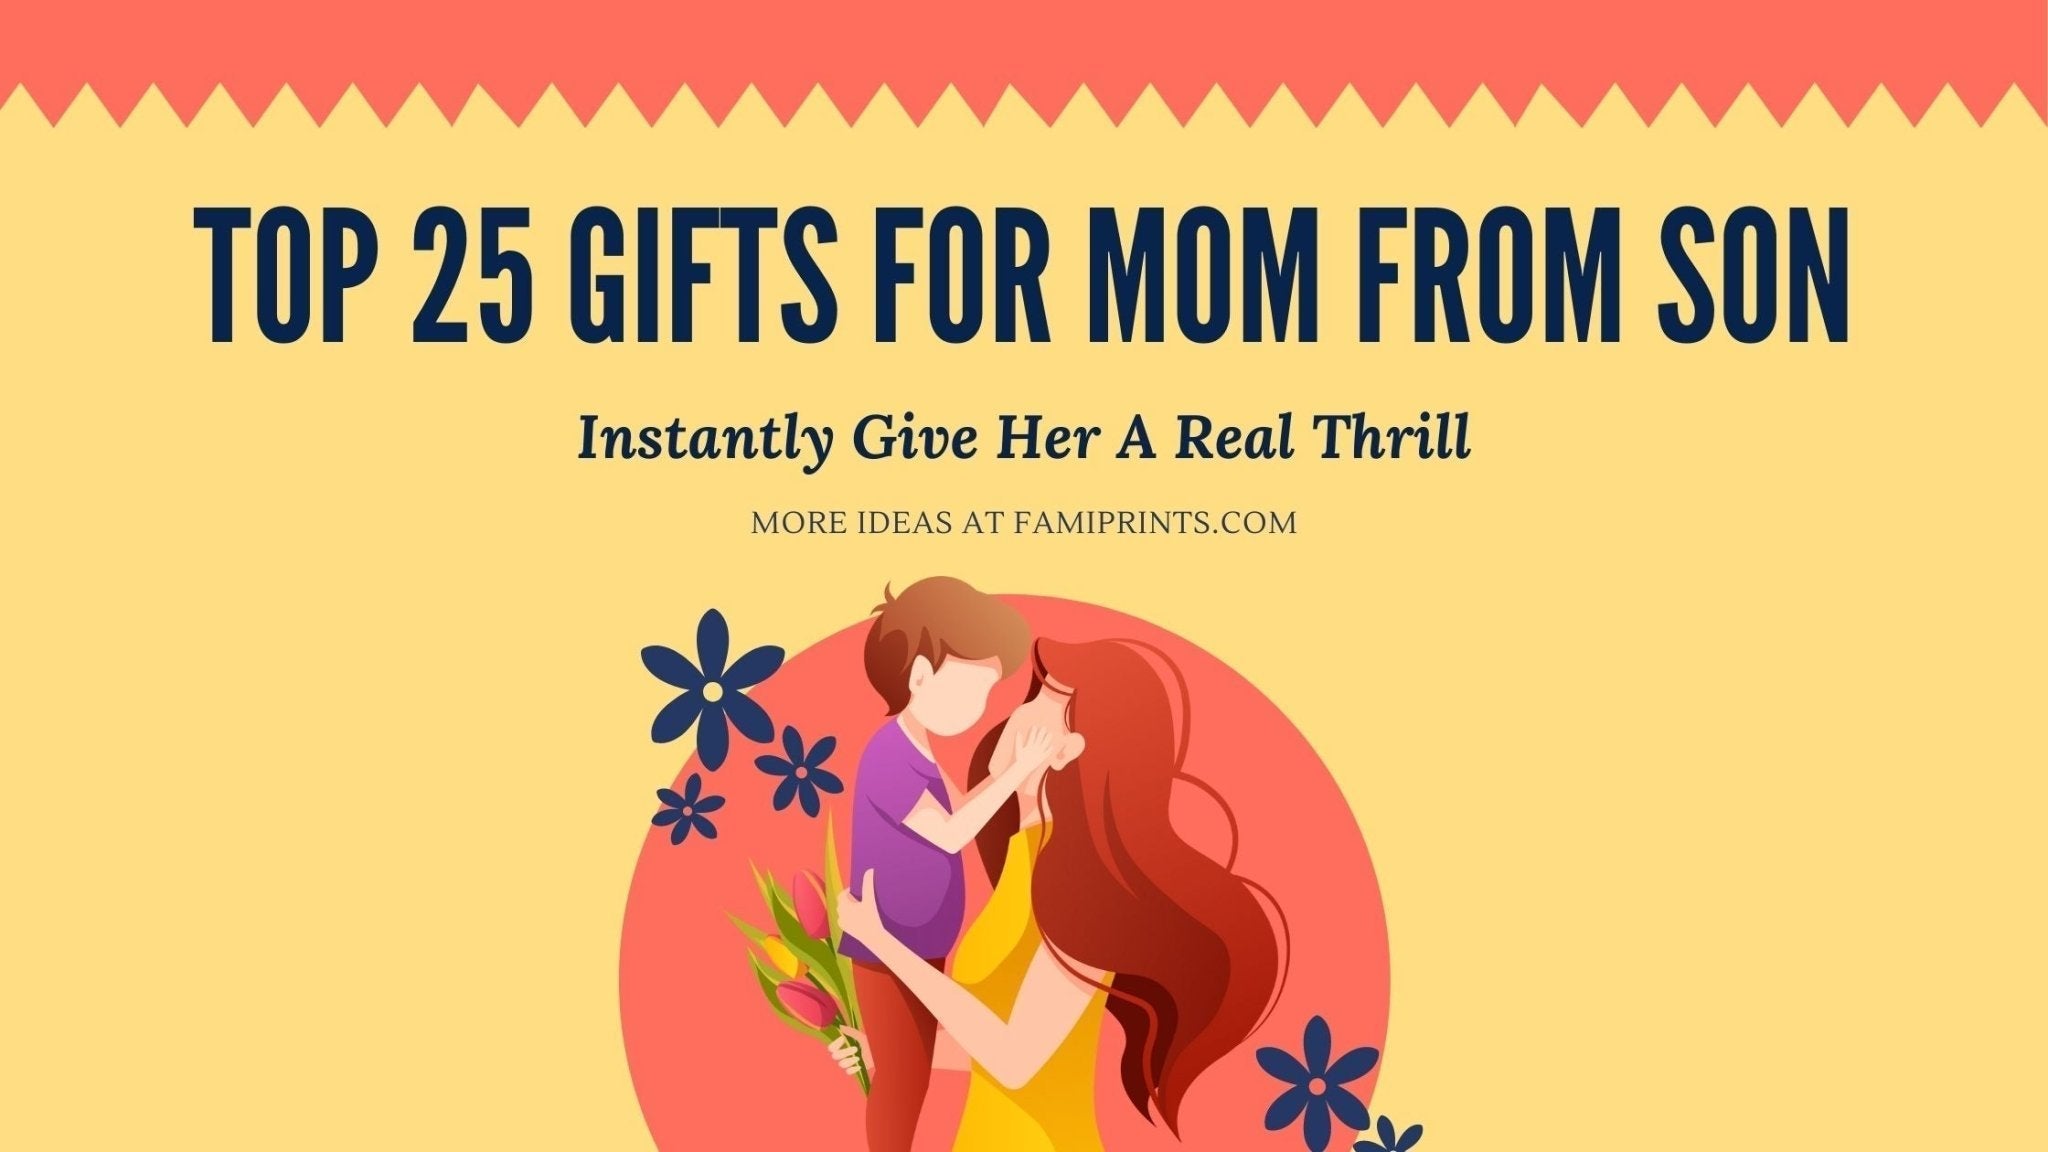 Top 25 Gifts For Mom From Son Instantly Give Her A Real Thrill - FamiPrints | Trending Customizable Family Gifts